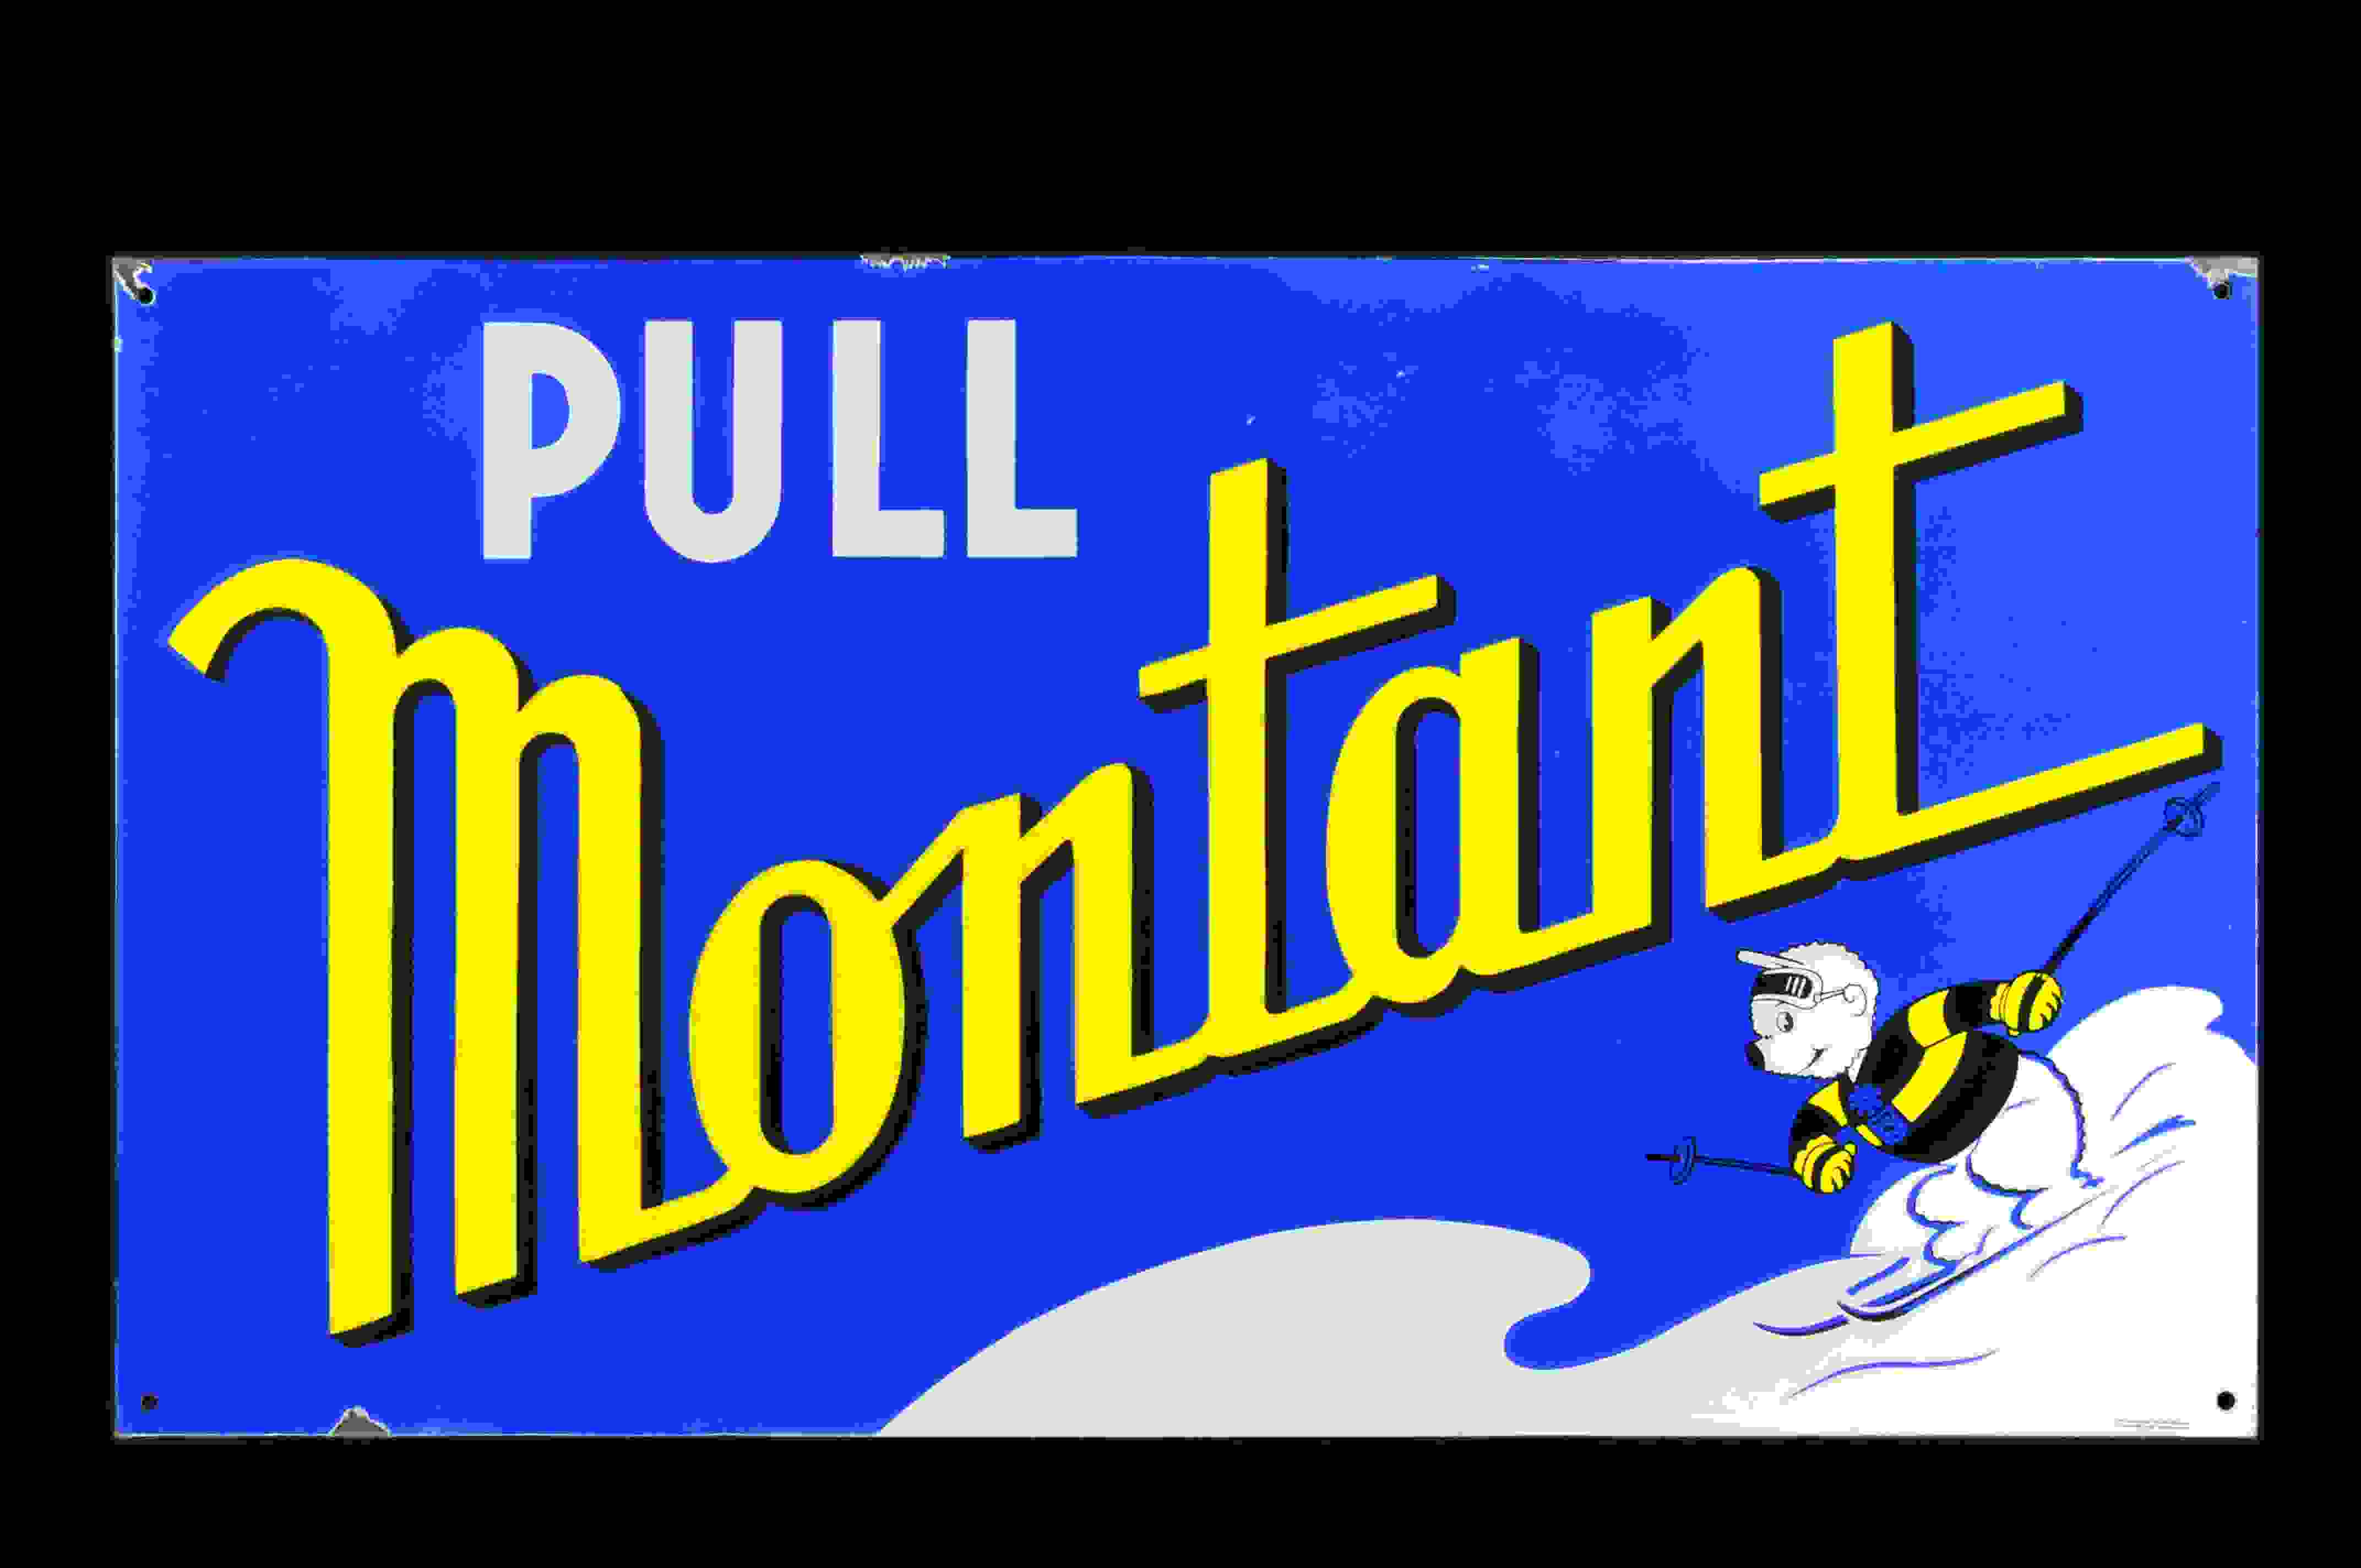 Pull Montant 